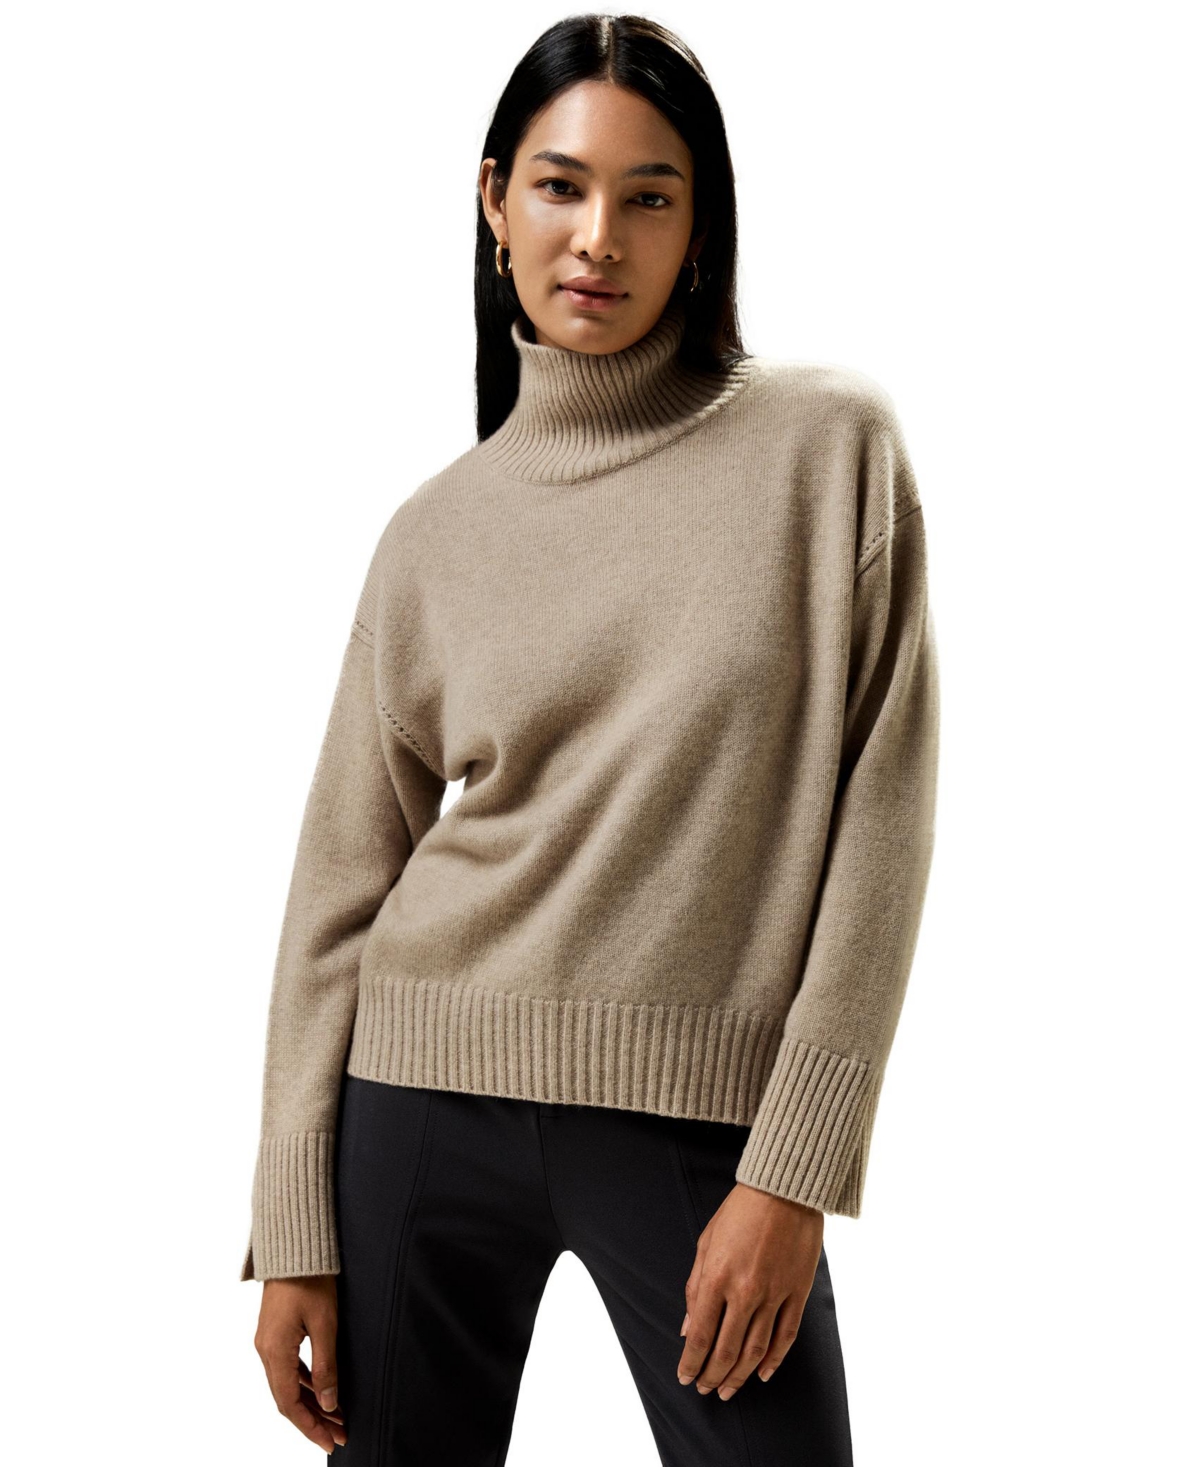 Women's Turtleneck Relaxed-Fit Cashmere Sweater for Women - White